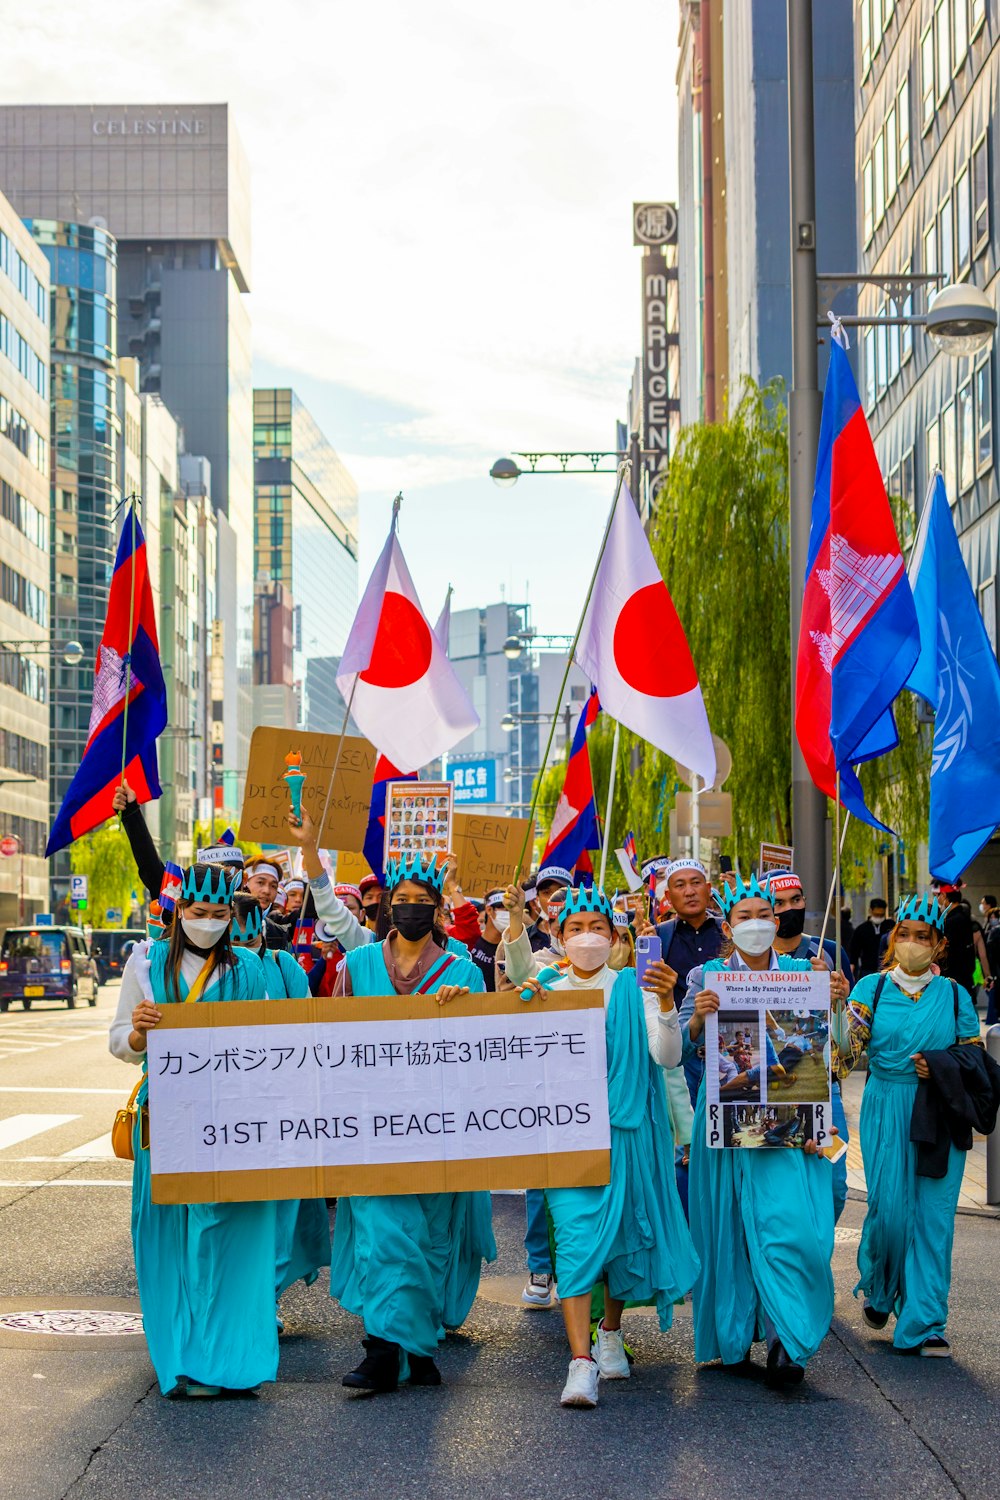 a group of people holding signs and flags on a street